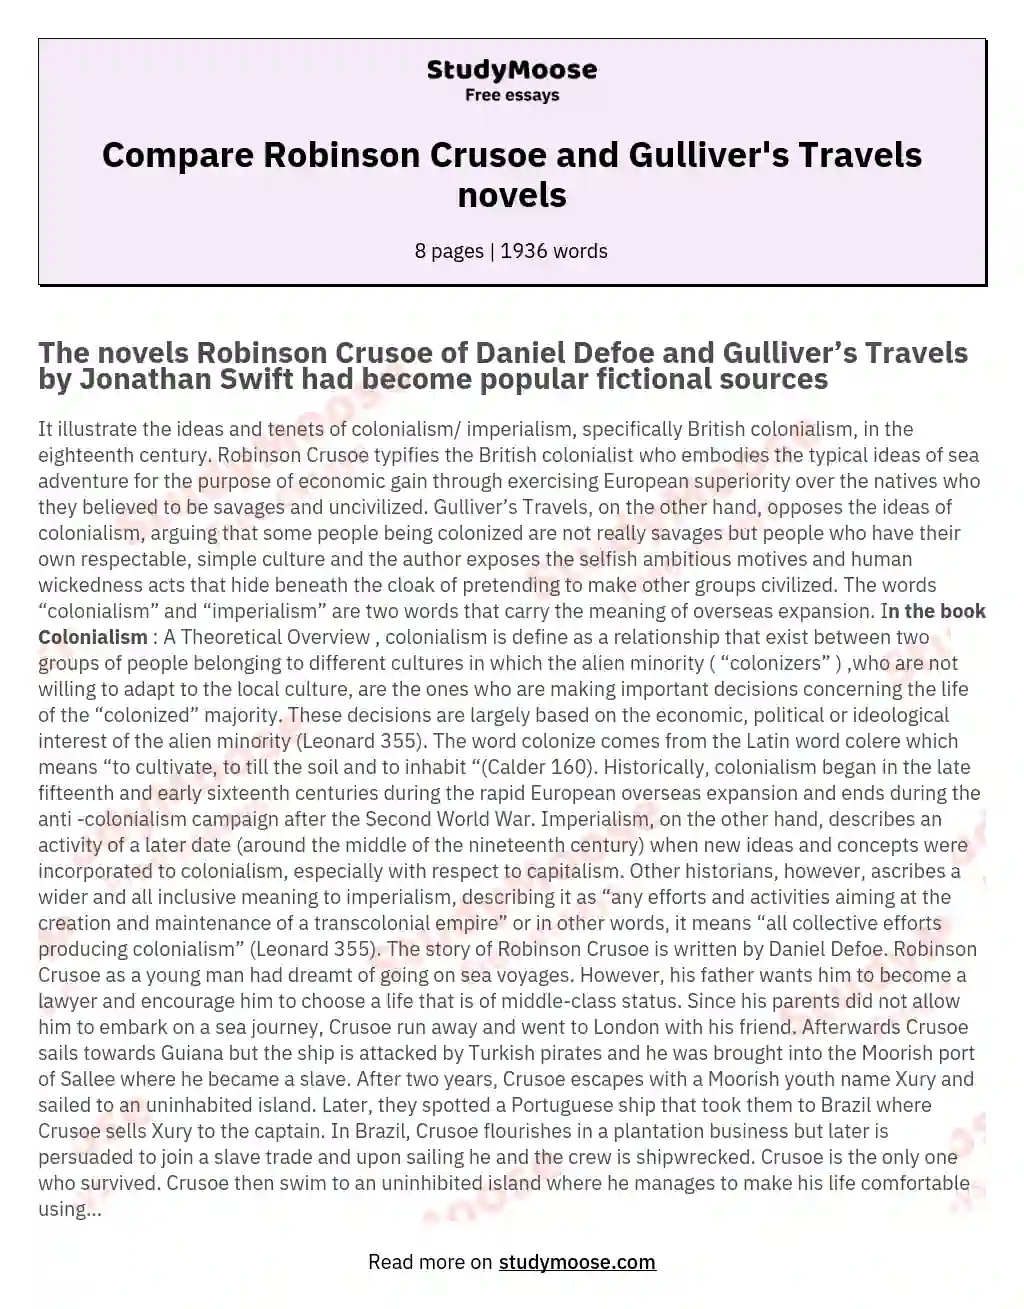 Compare Robinson Crusoe and Gulliver's Travels novels essay